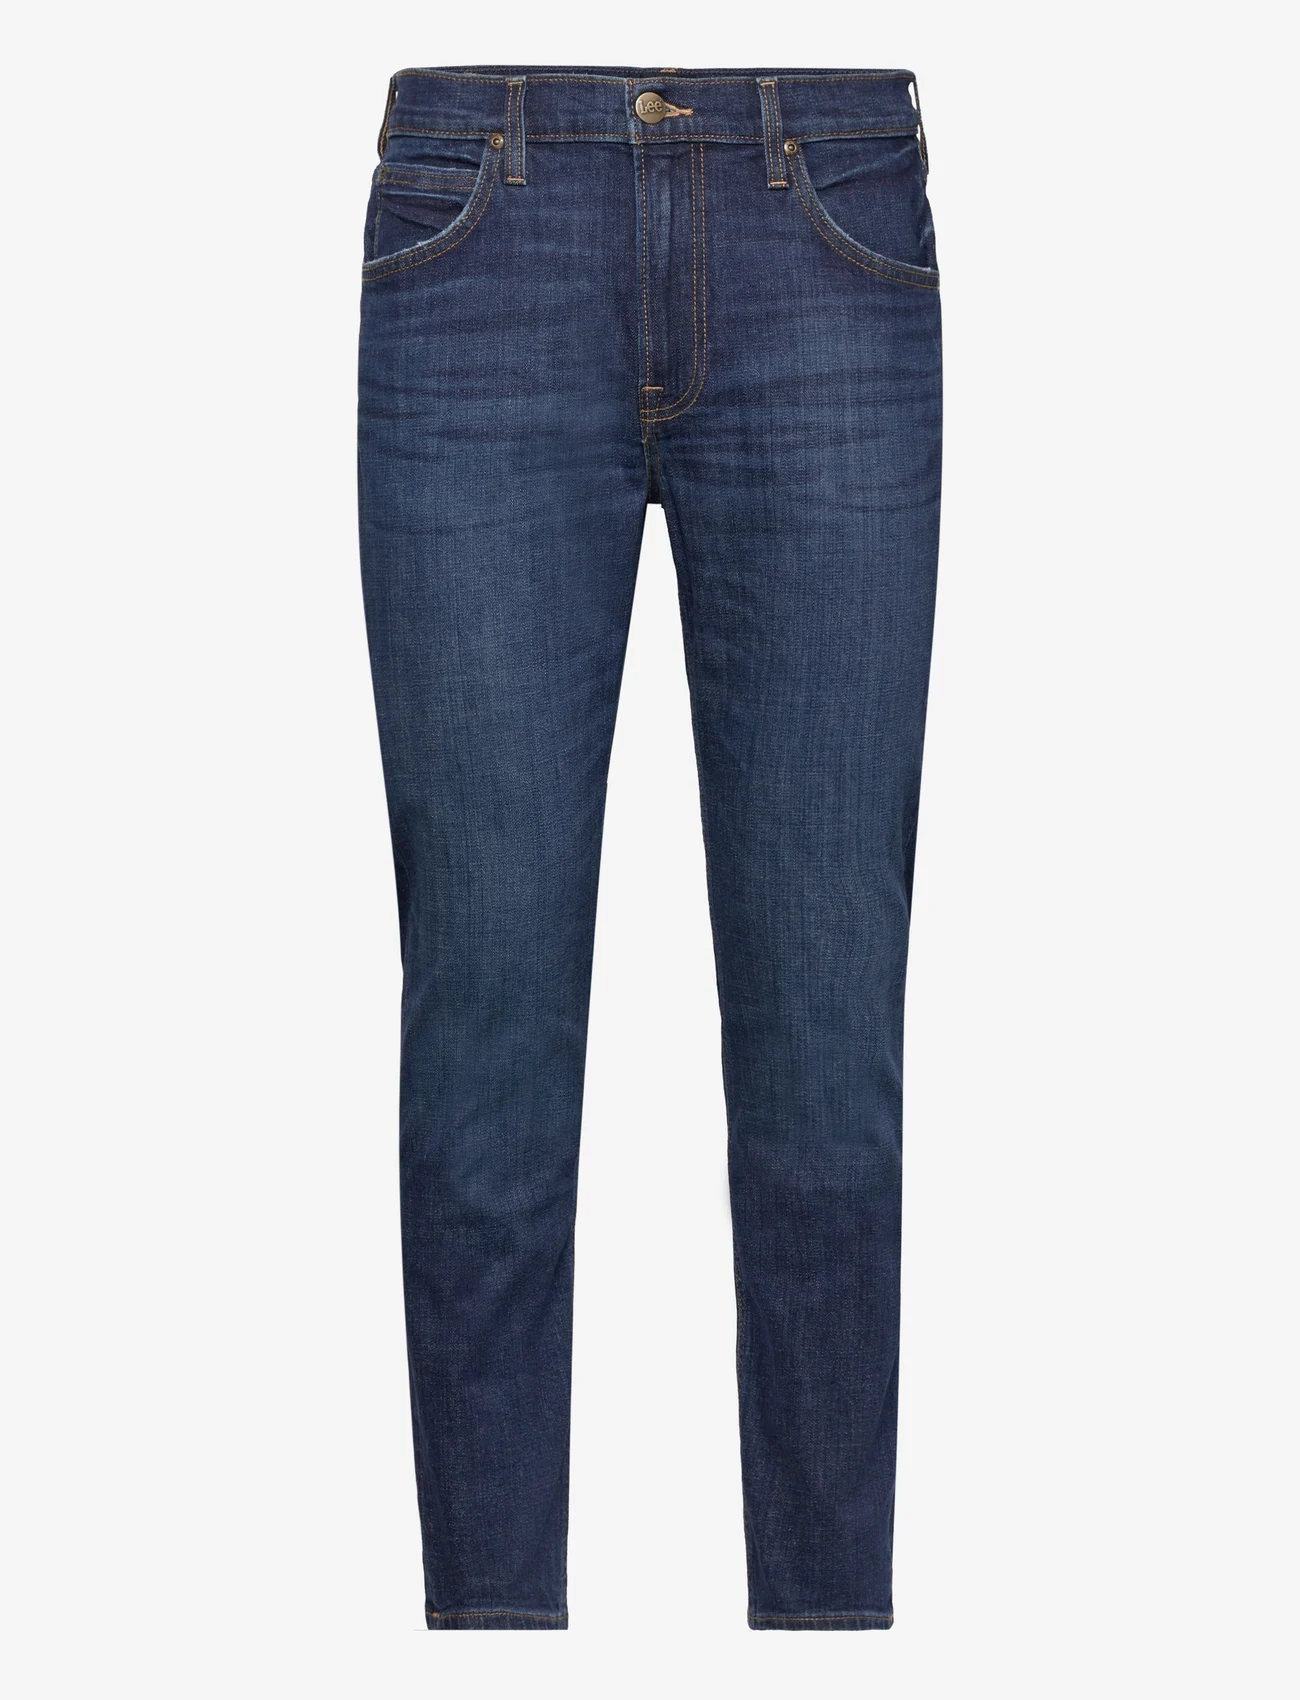 Lee Jeans - AUSTIN - tapered jeans - hero - 0